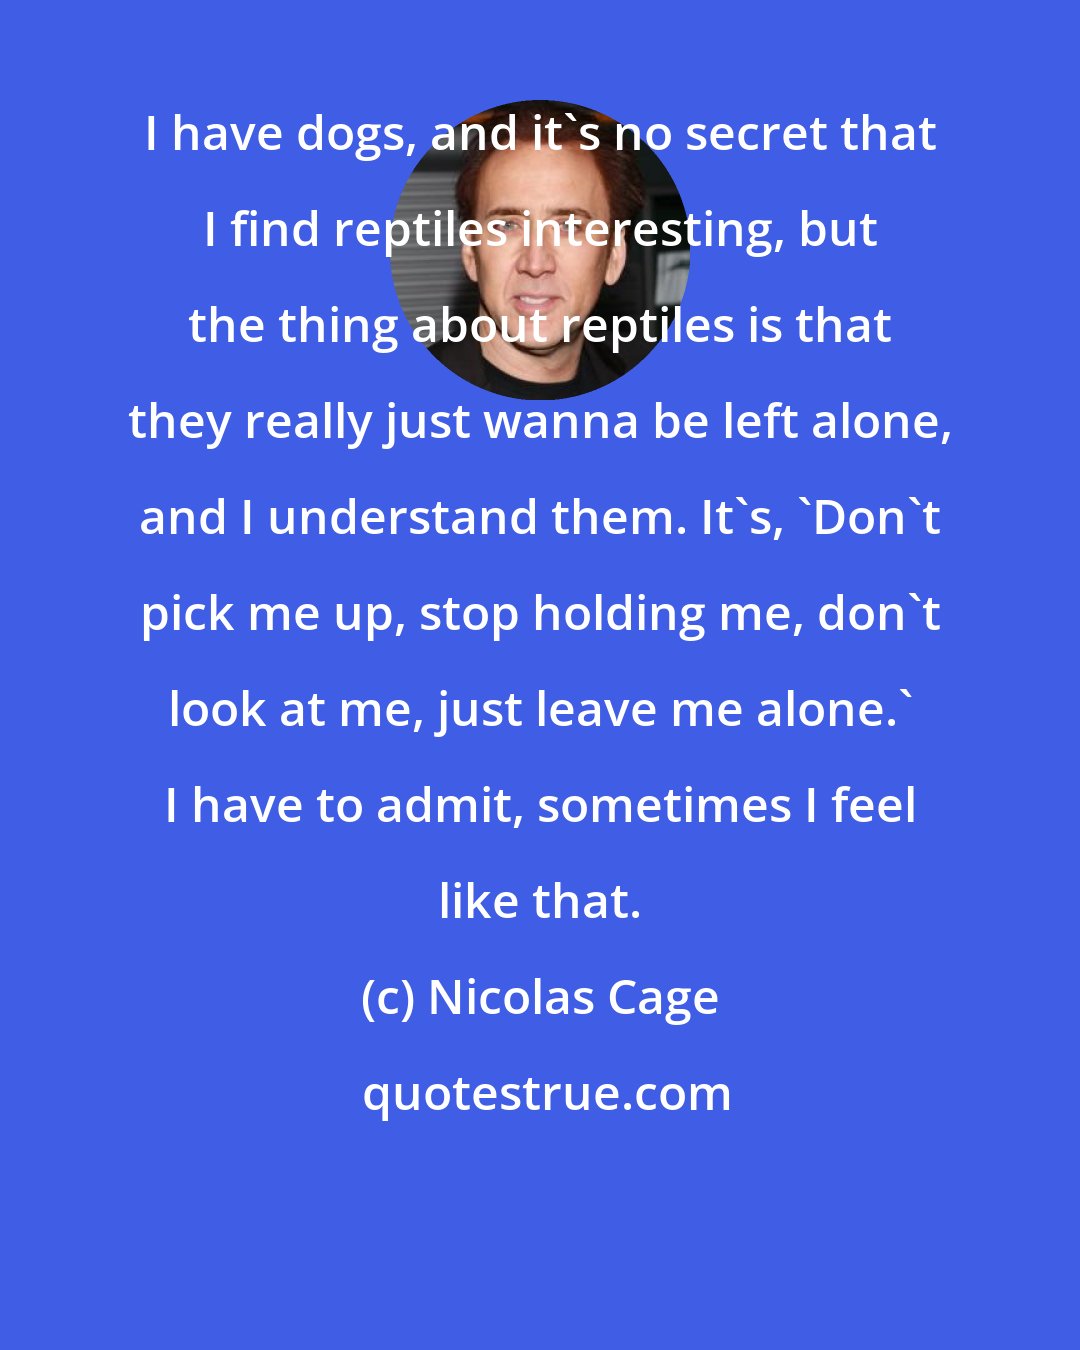 Nicolas Cage: I have dogs, and it's no secret that I find reptiles interesting, but the thing about reptiles is that they really just wanna be left alone, and I understand them. It's, 'Don't pick me up, stop holding me, don't look at me, just leave me alone.' I have to admit, sometimes I feel like that.